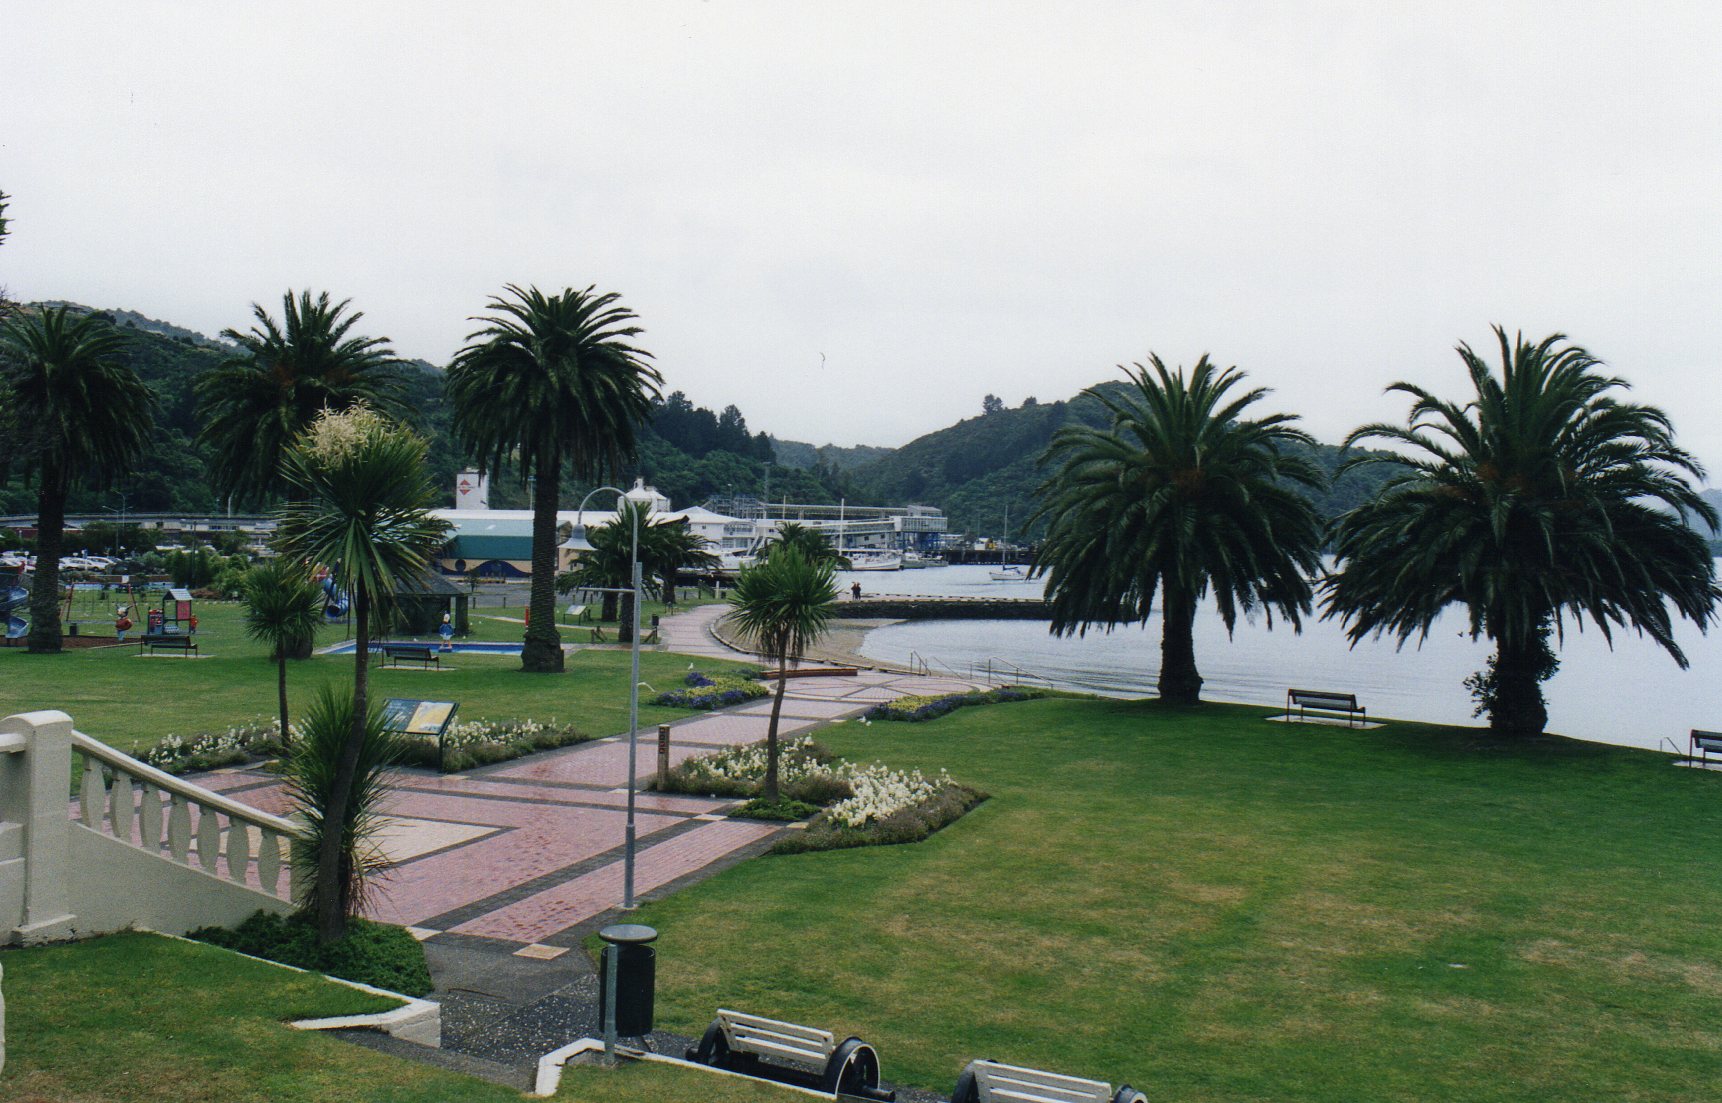 The Picton Foreshore